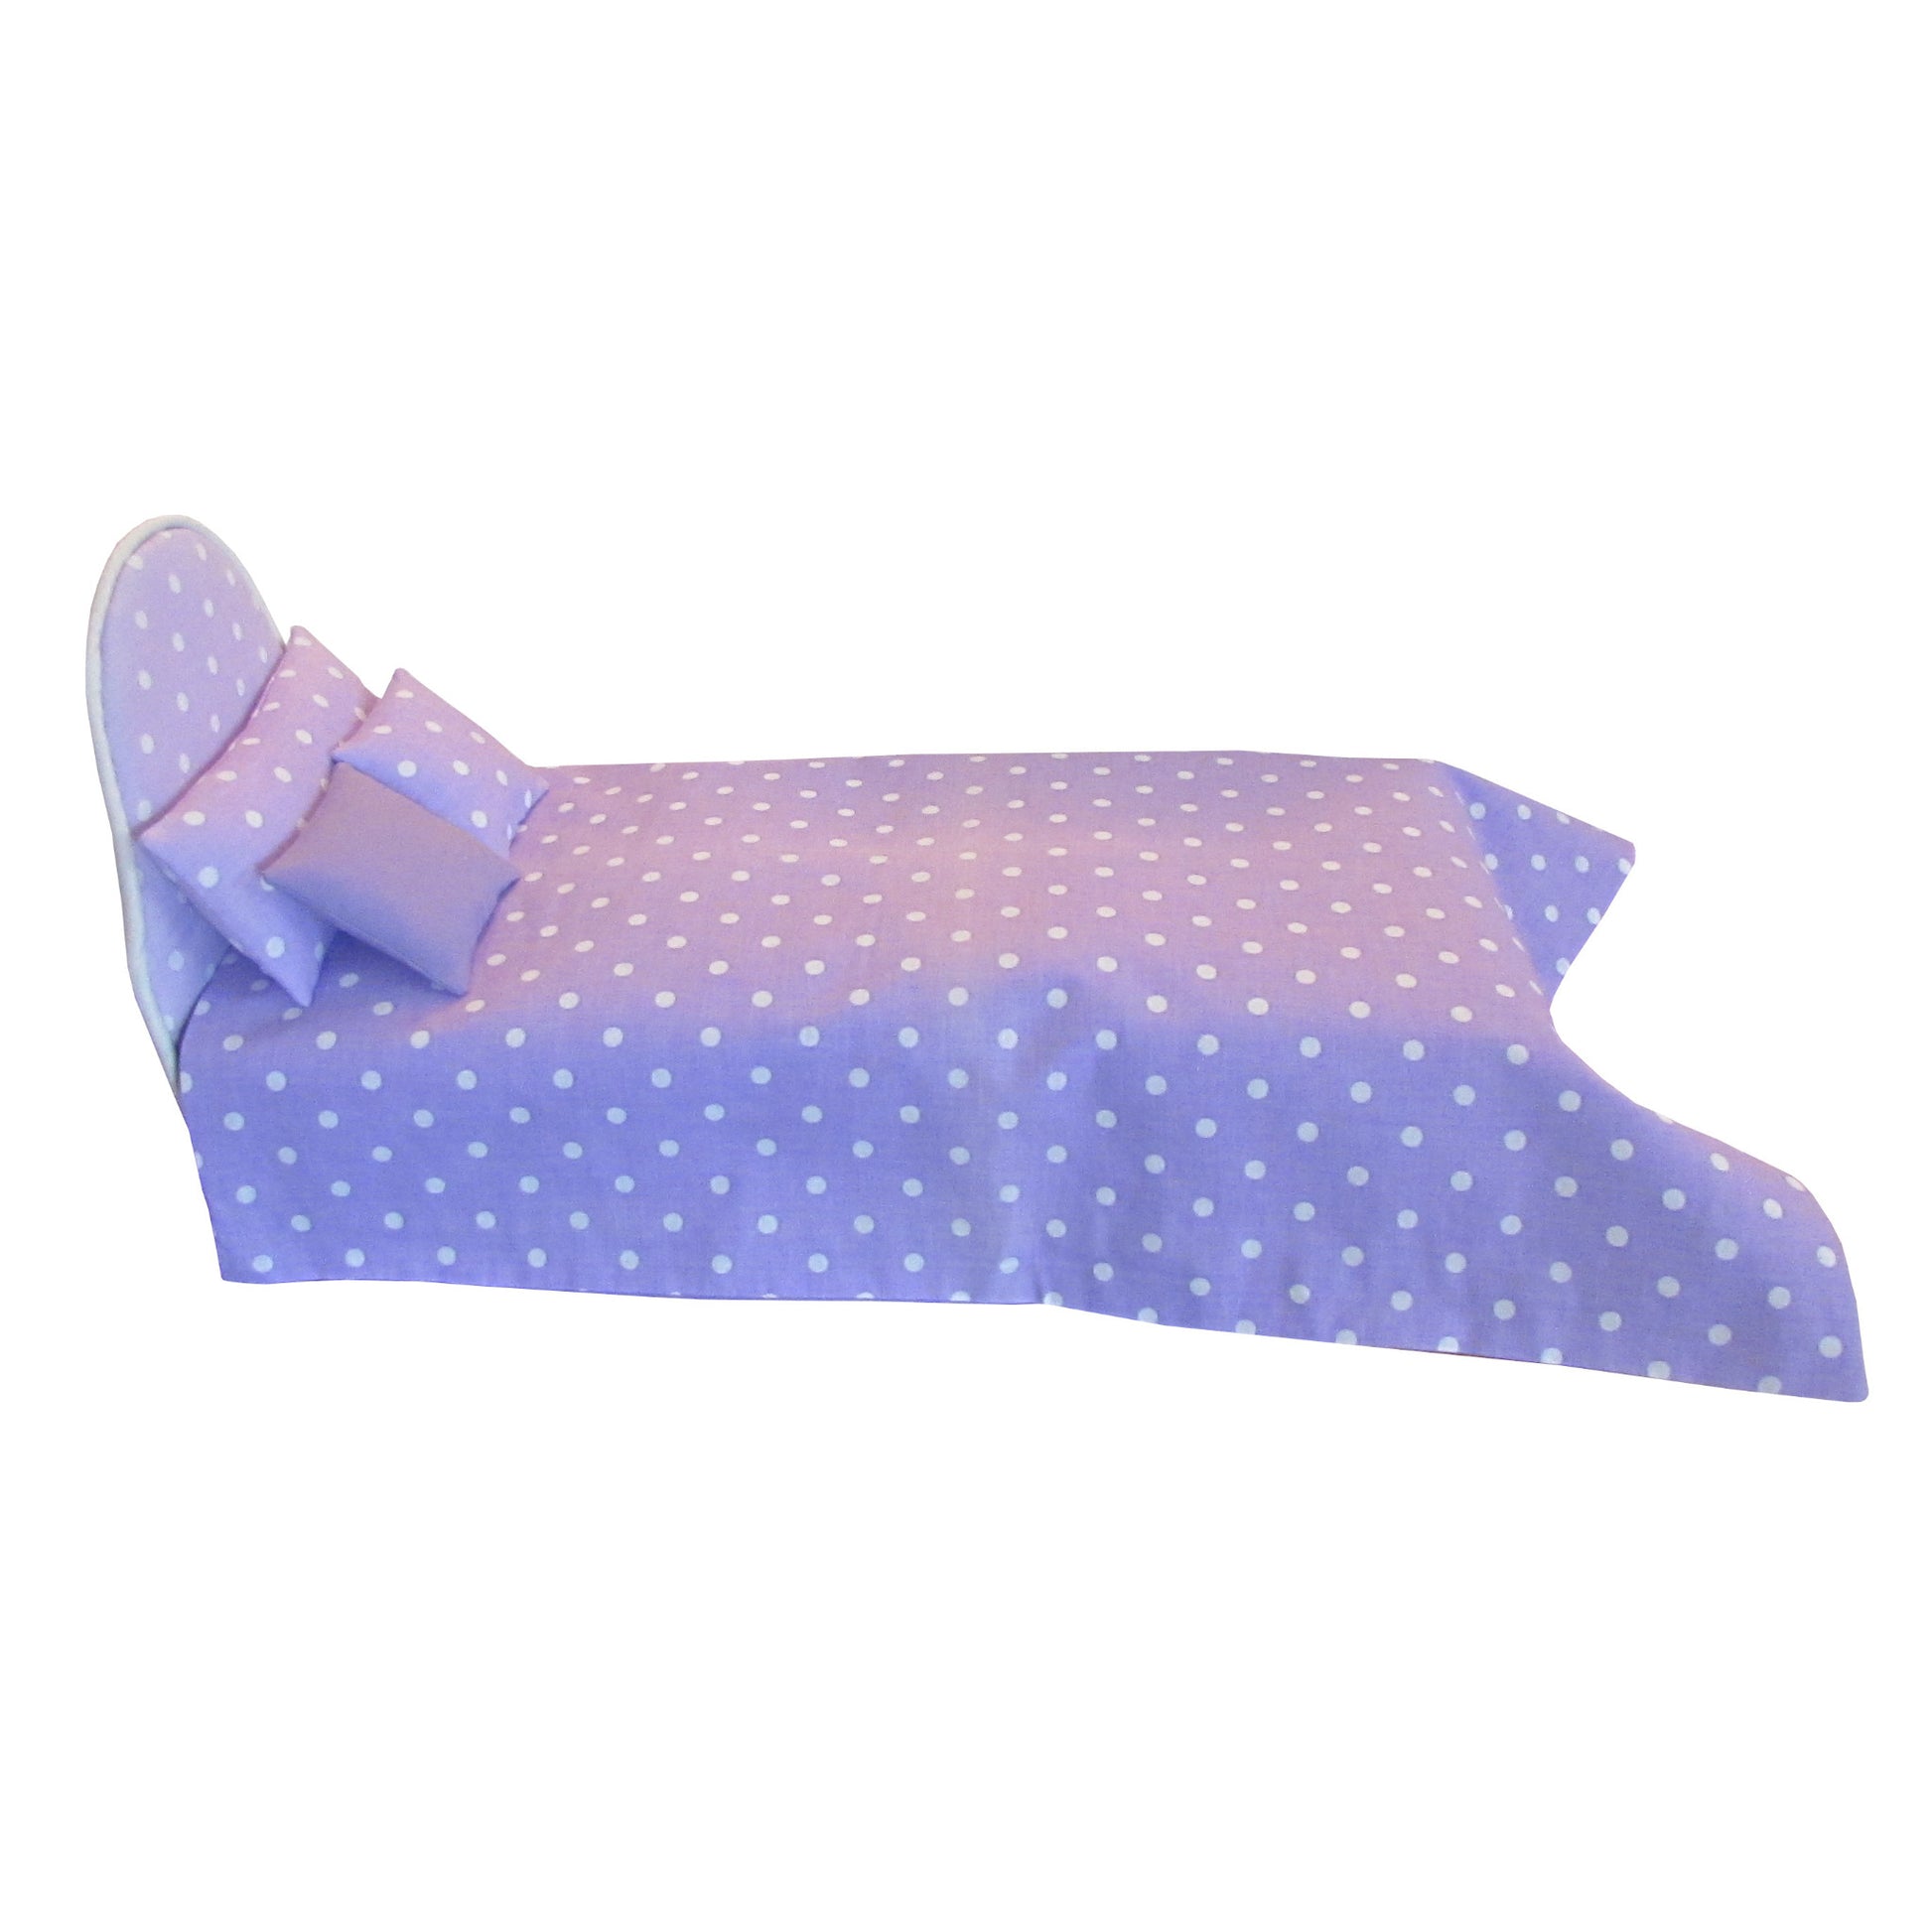 Lavender Dots Doll Headboard and Doll Bedding for 11.5-inch and 12-inch dolls